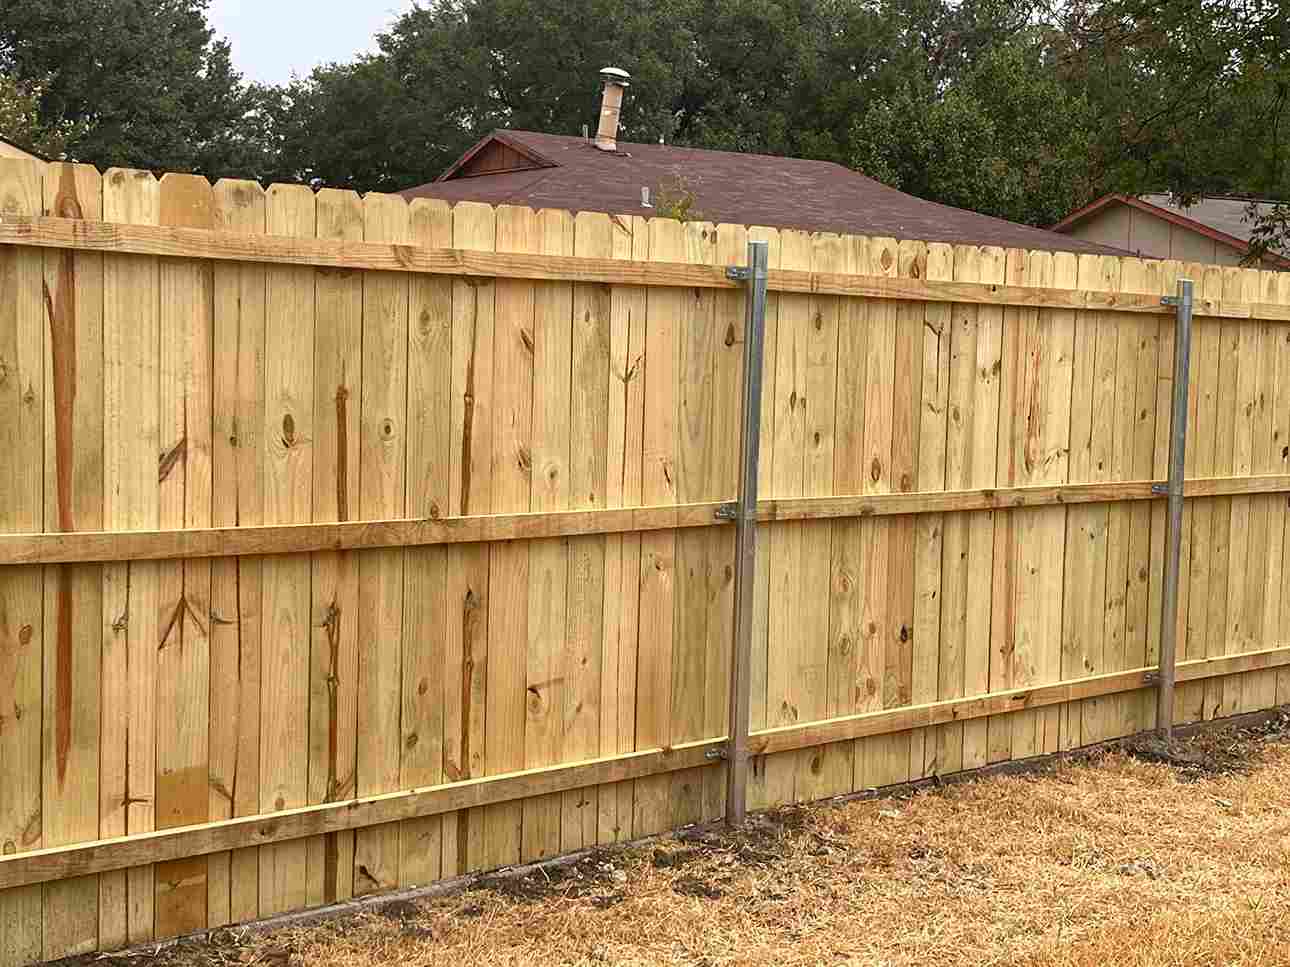 Wood and metal fence